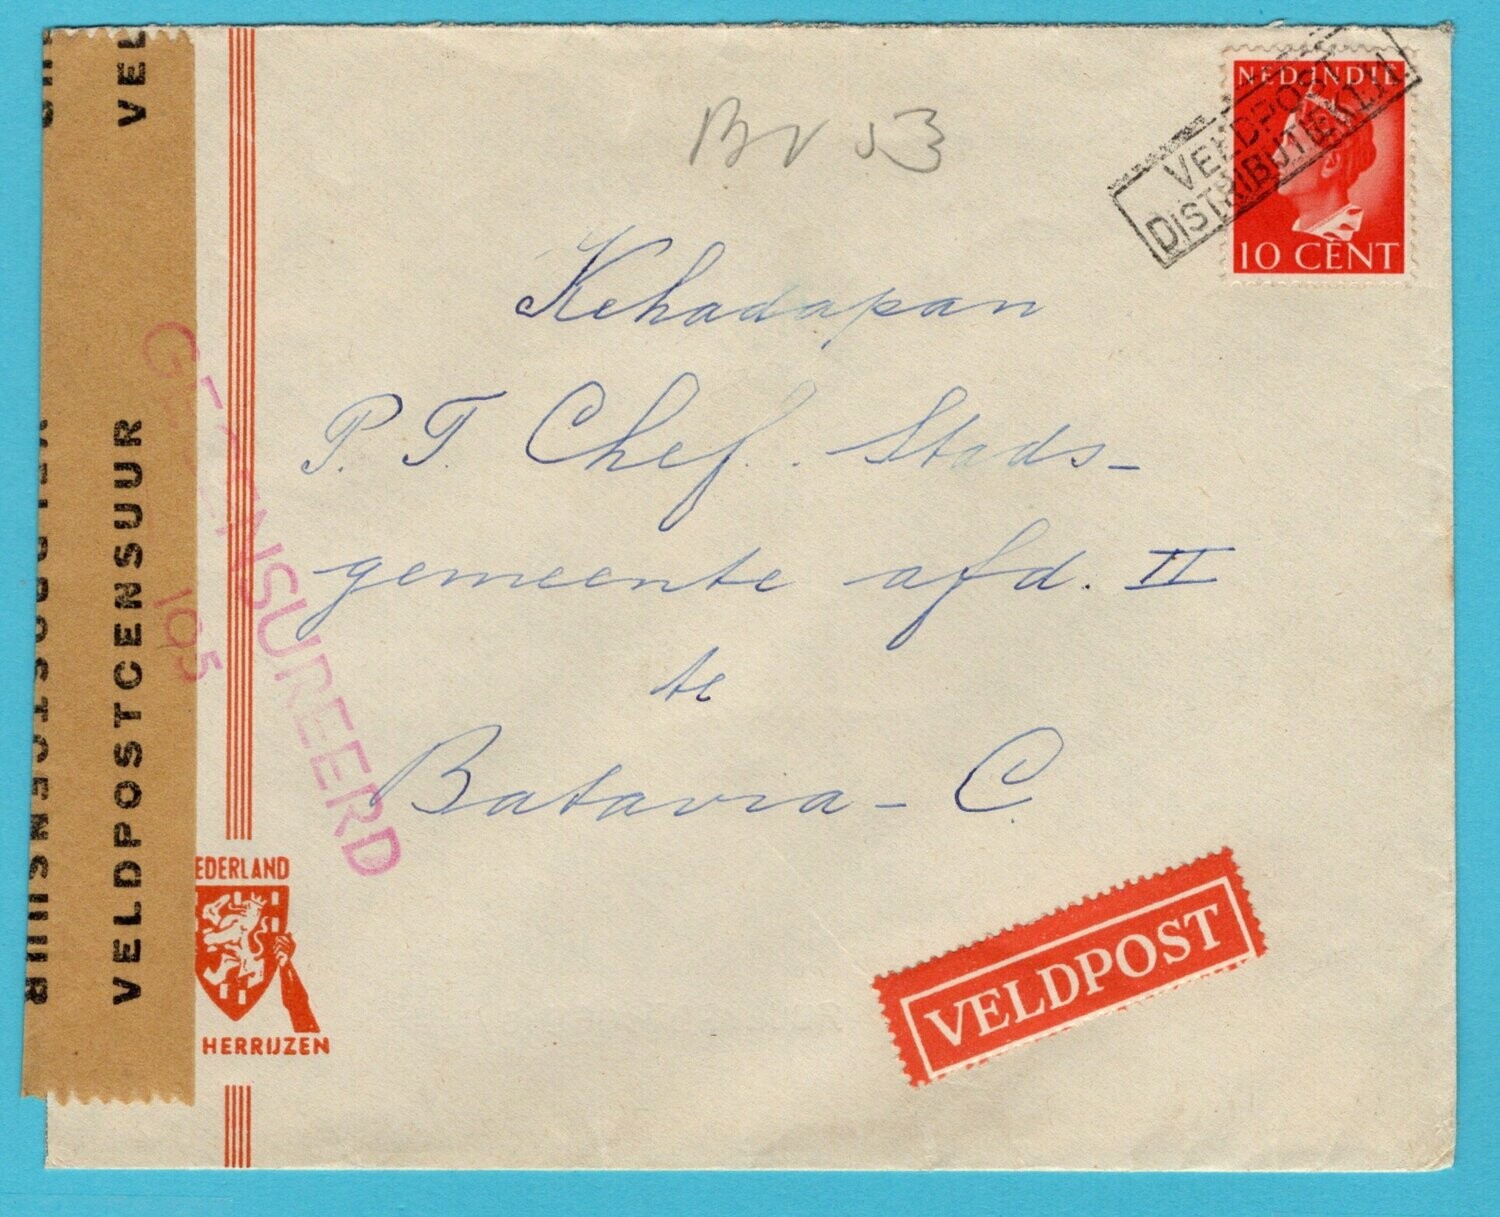 NETHERLANDS EAST INDIES fieldpost censor cover 1942 (?) to Batavia